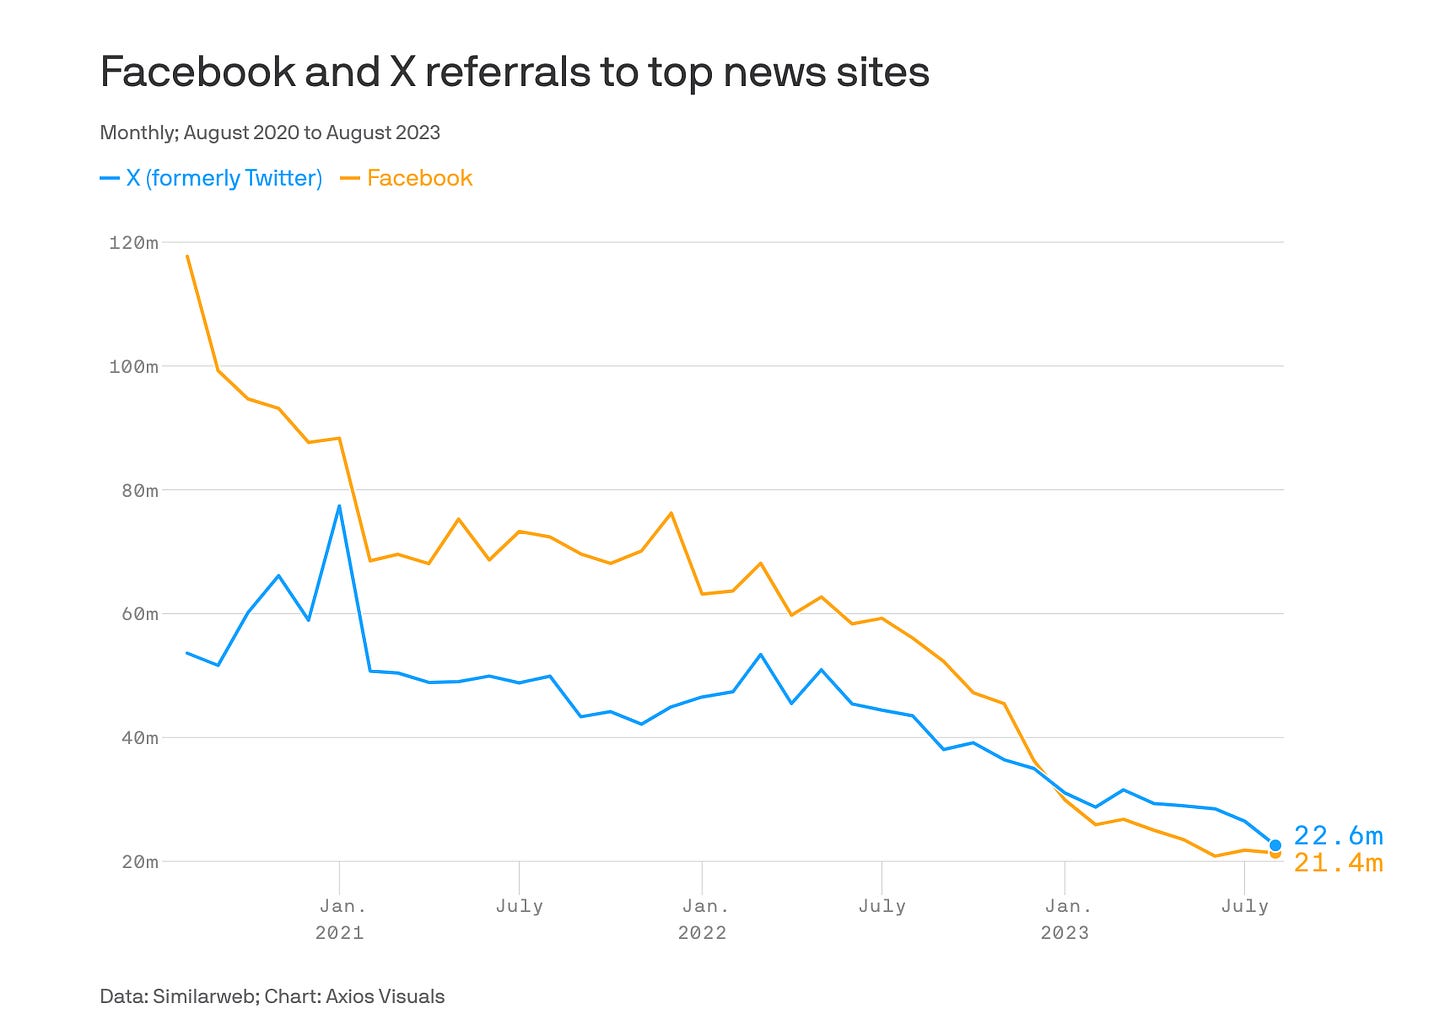 This chart shows a huge decline in referrals from social media to news sites